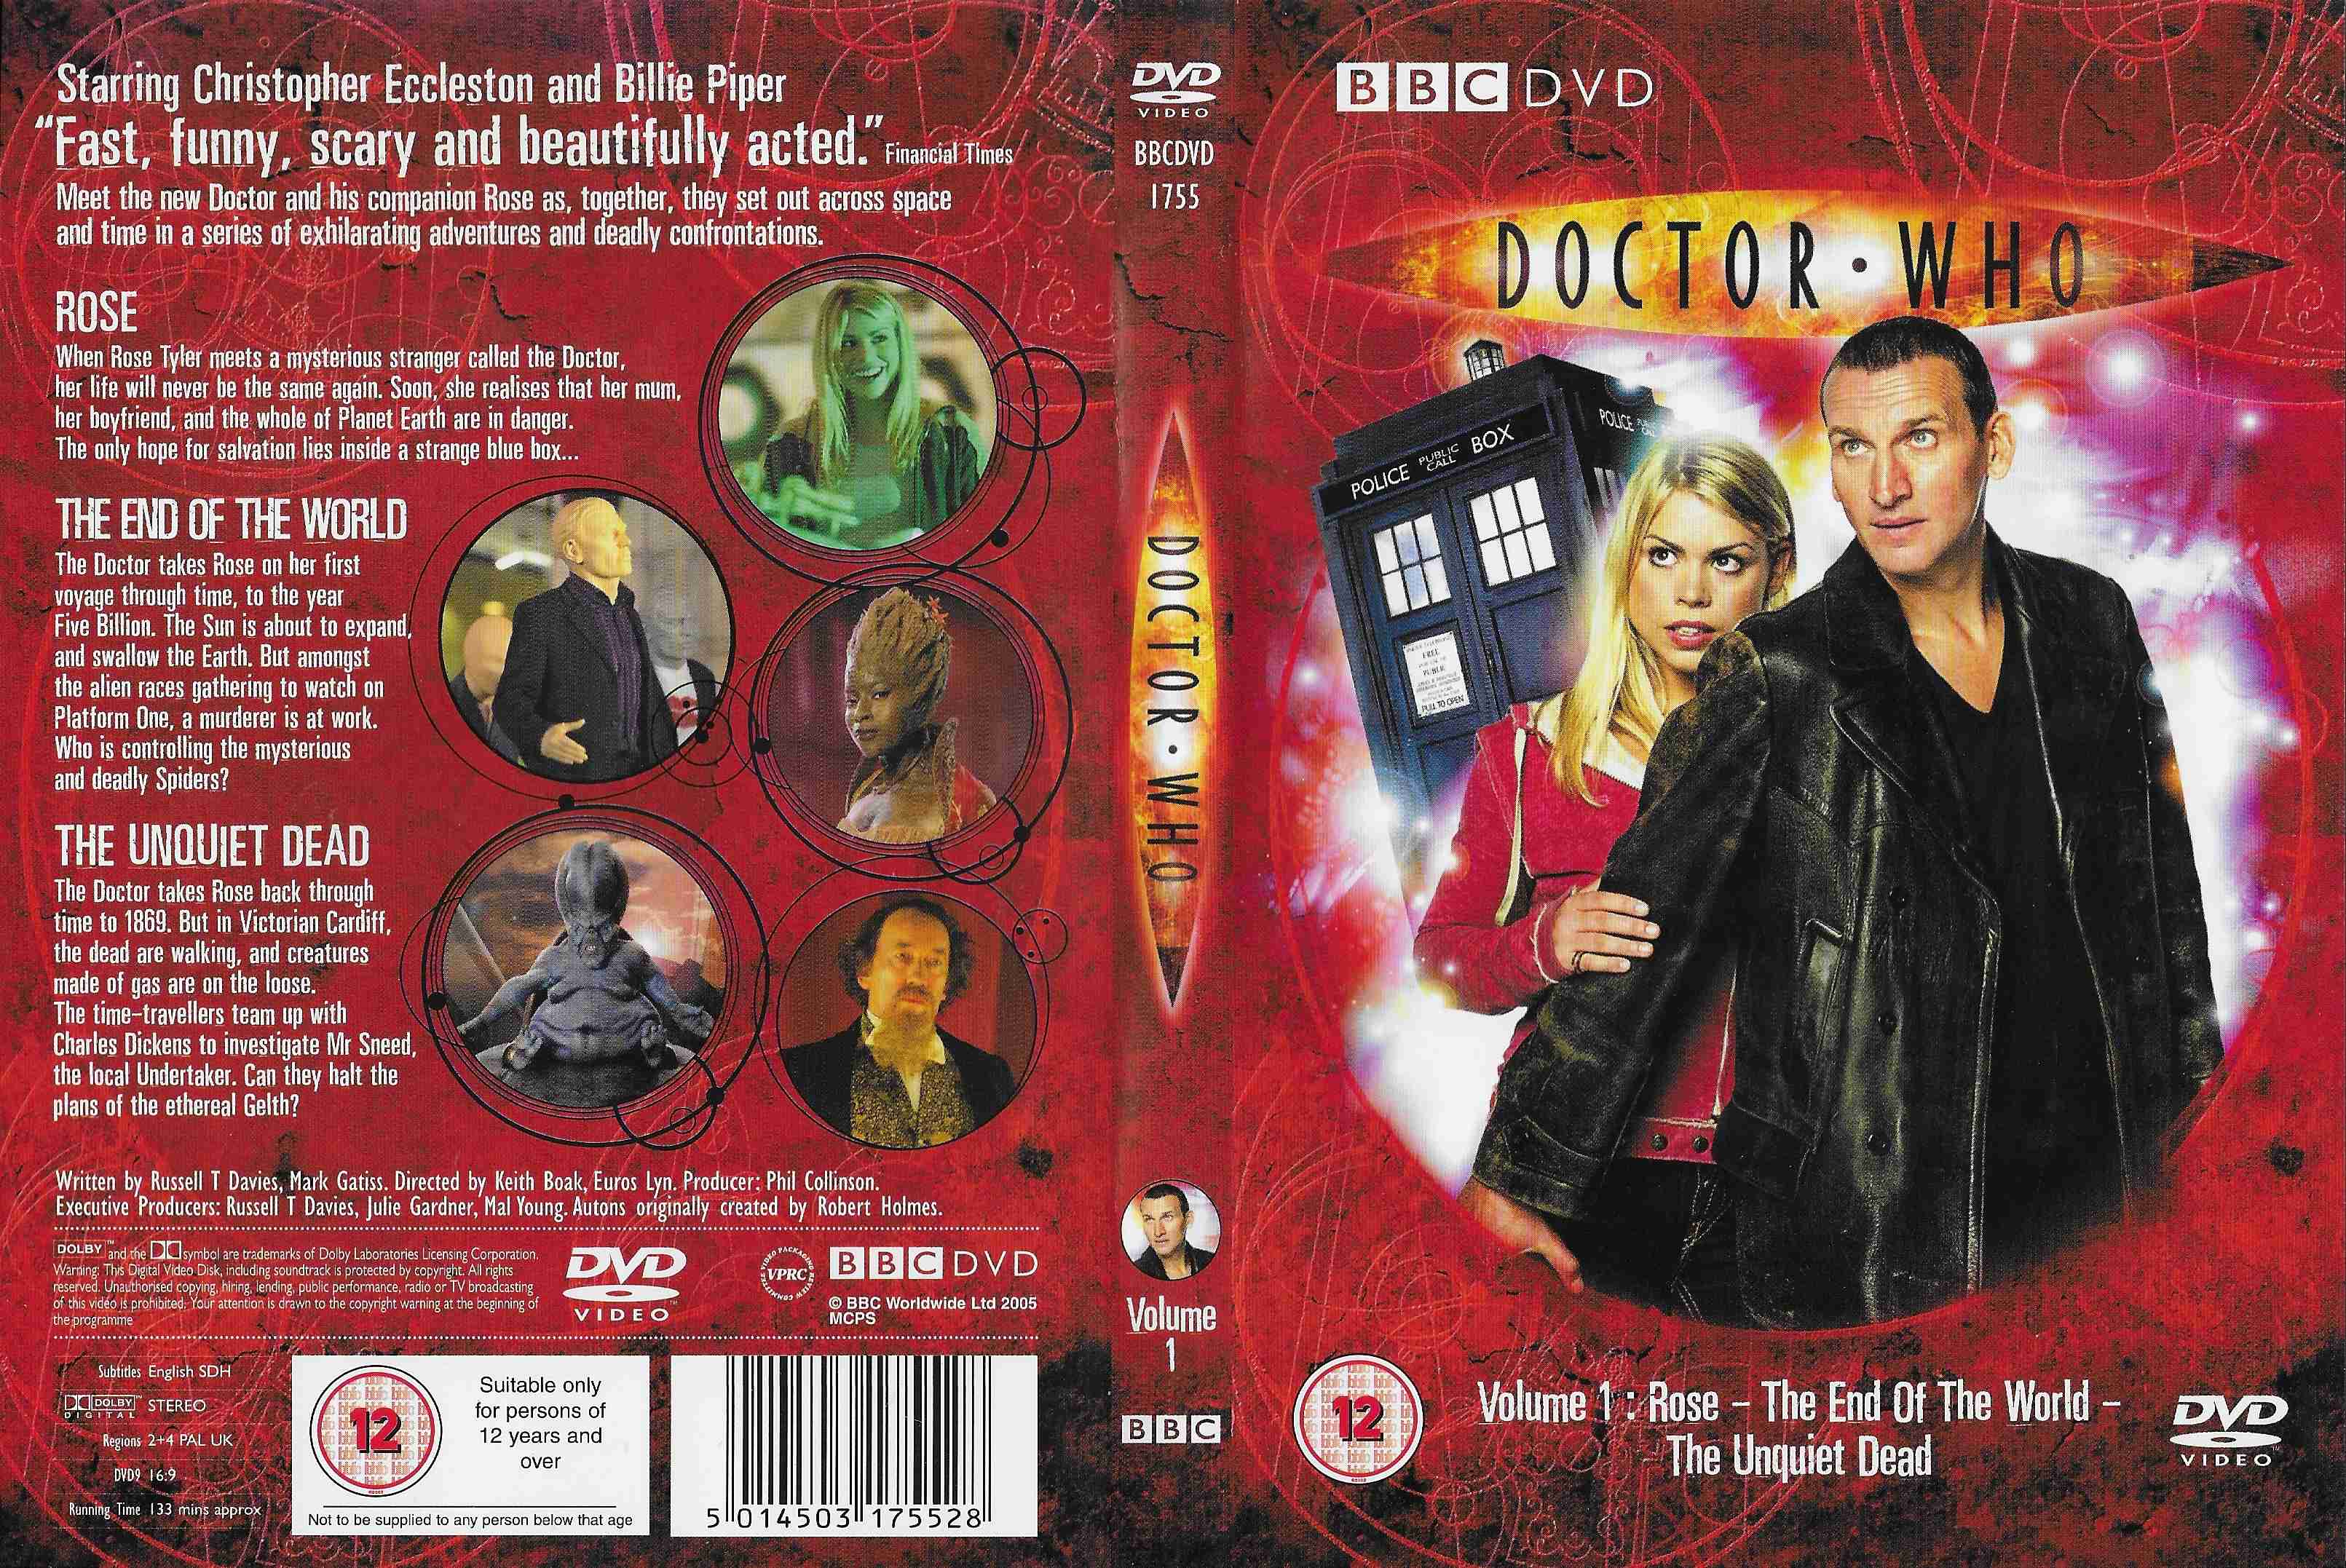 Doctor Who: Series 1 Volume 1 (DVD, 2006) for sale online